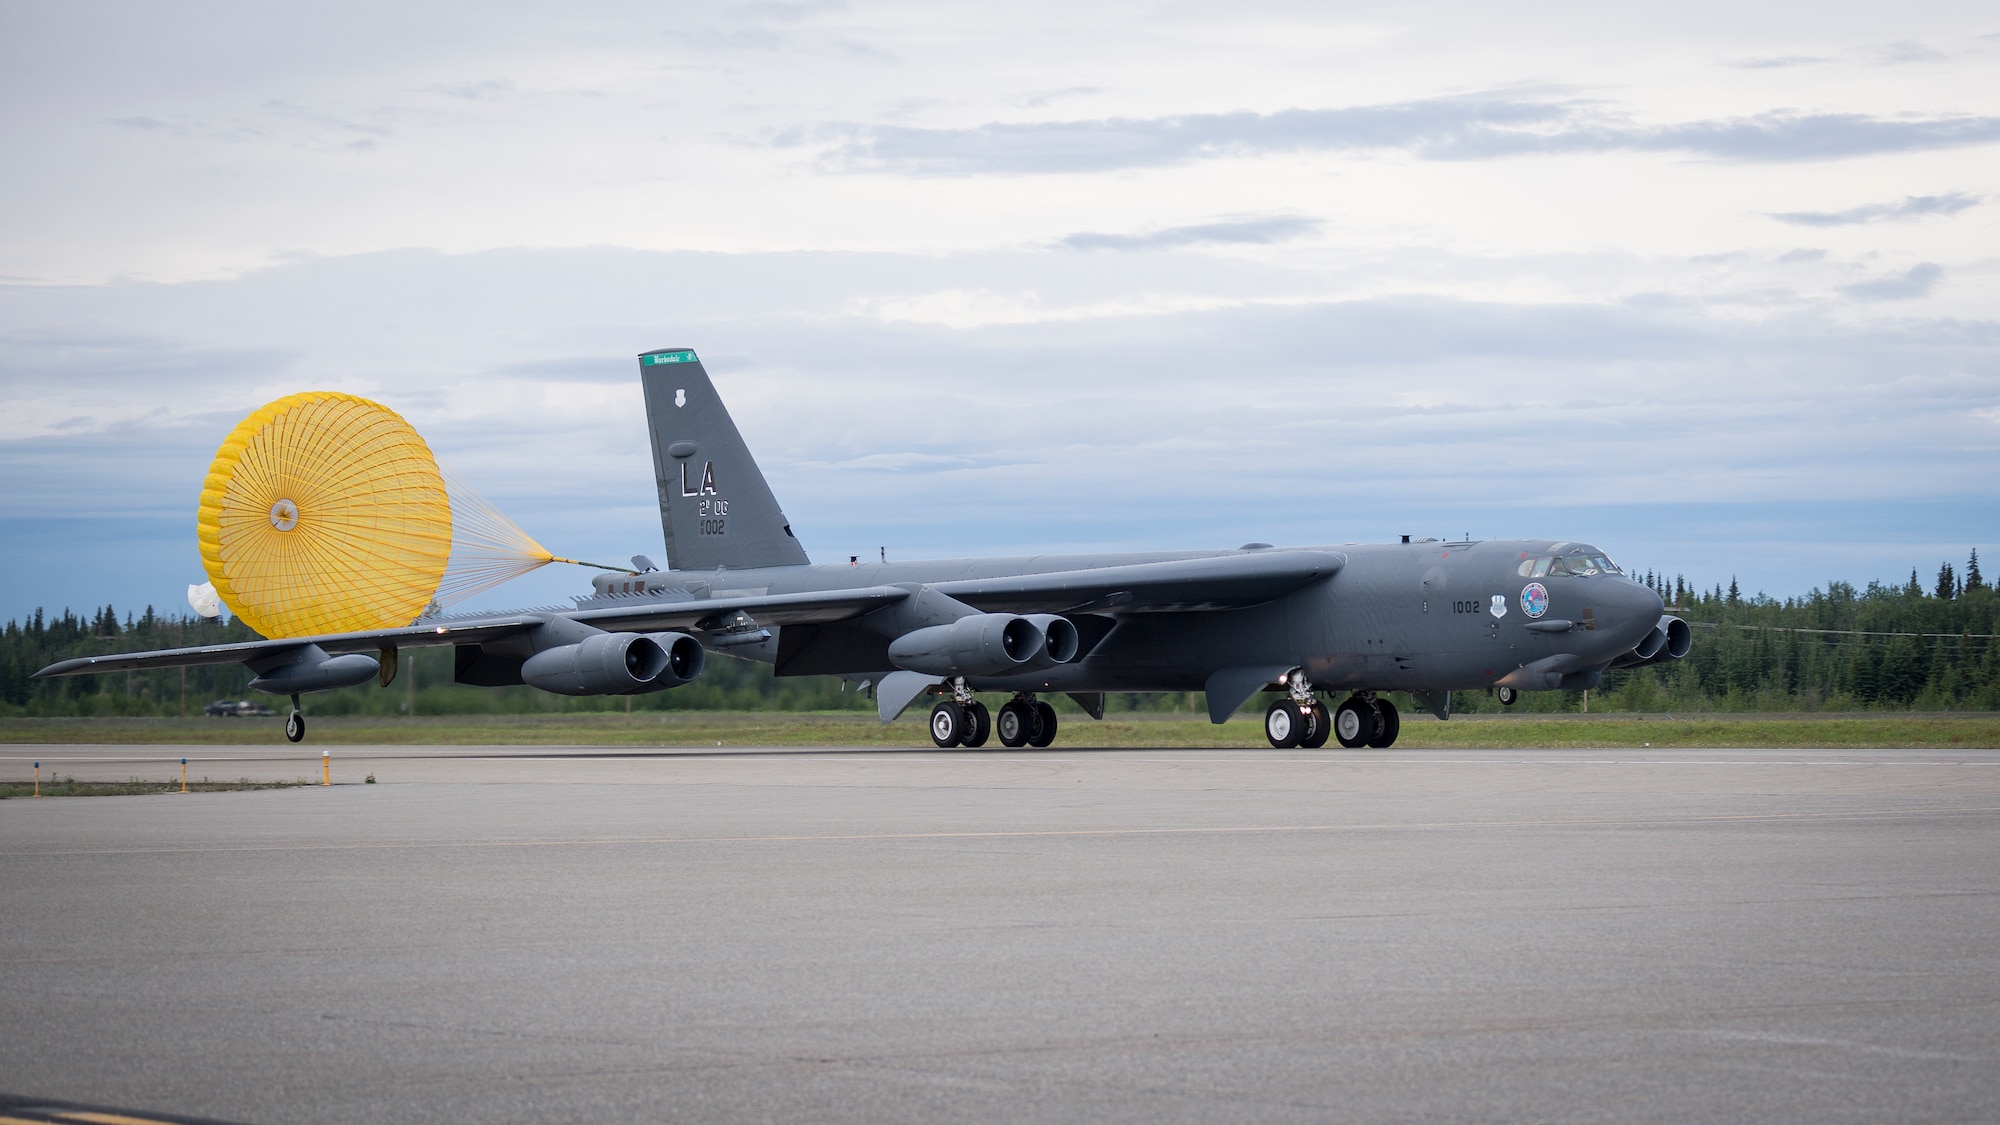 A B-52H Stratofortress deployed from Barksdale Air Force Base, La., arrives at Eielson Air Force Base, Alaska, to conduct Bomber Task Force operations, June 14, 2020. Strategic bomber missions demonstrate the credibility of our forces to address a diverse and uncertain security environment. (U.S. Air Force photo by Senior Airman Lillian Miller)